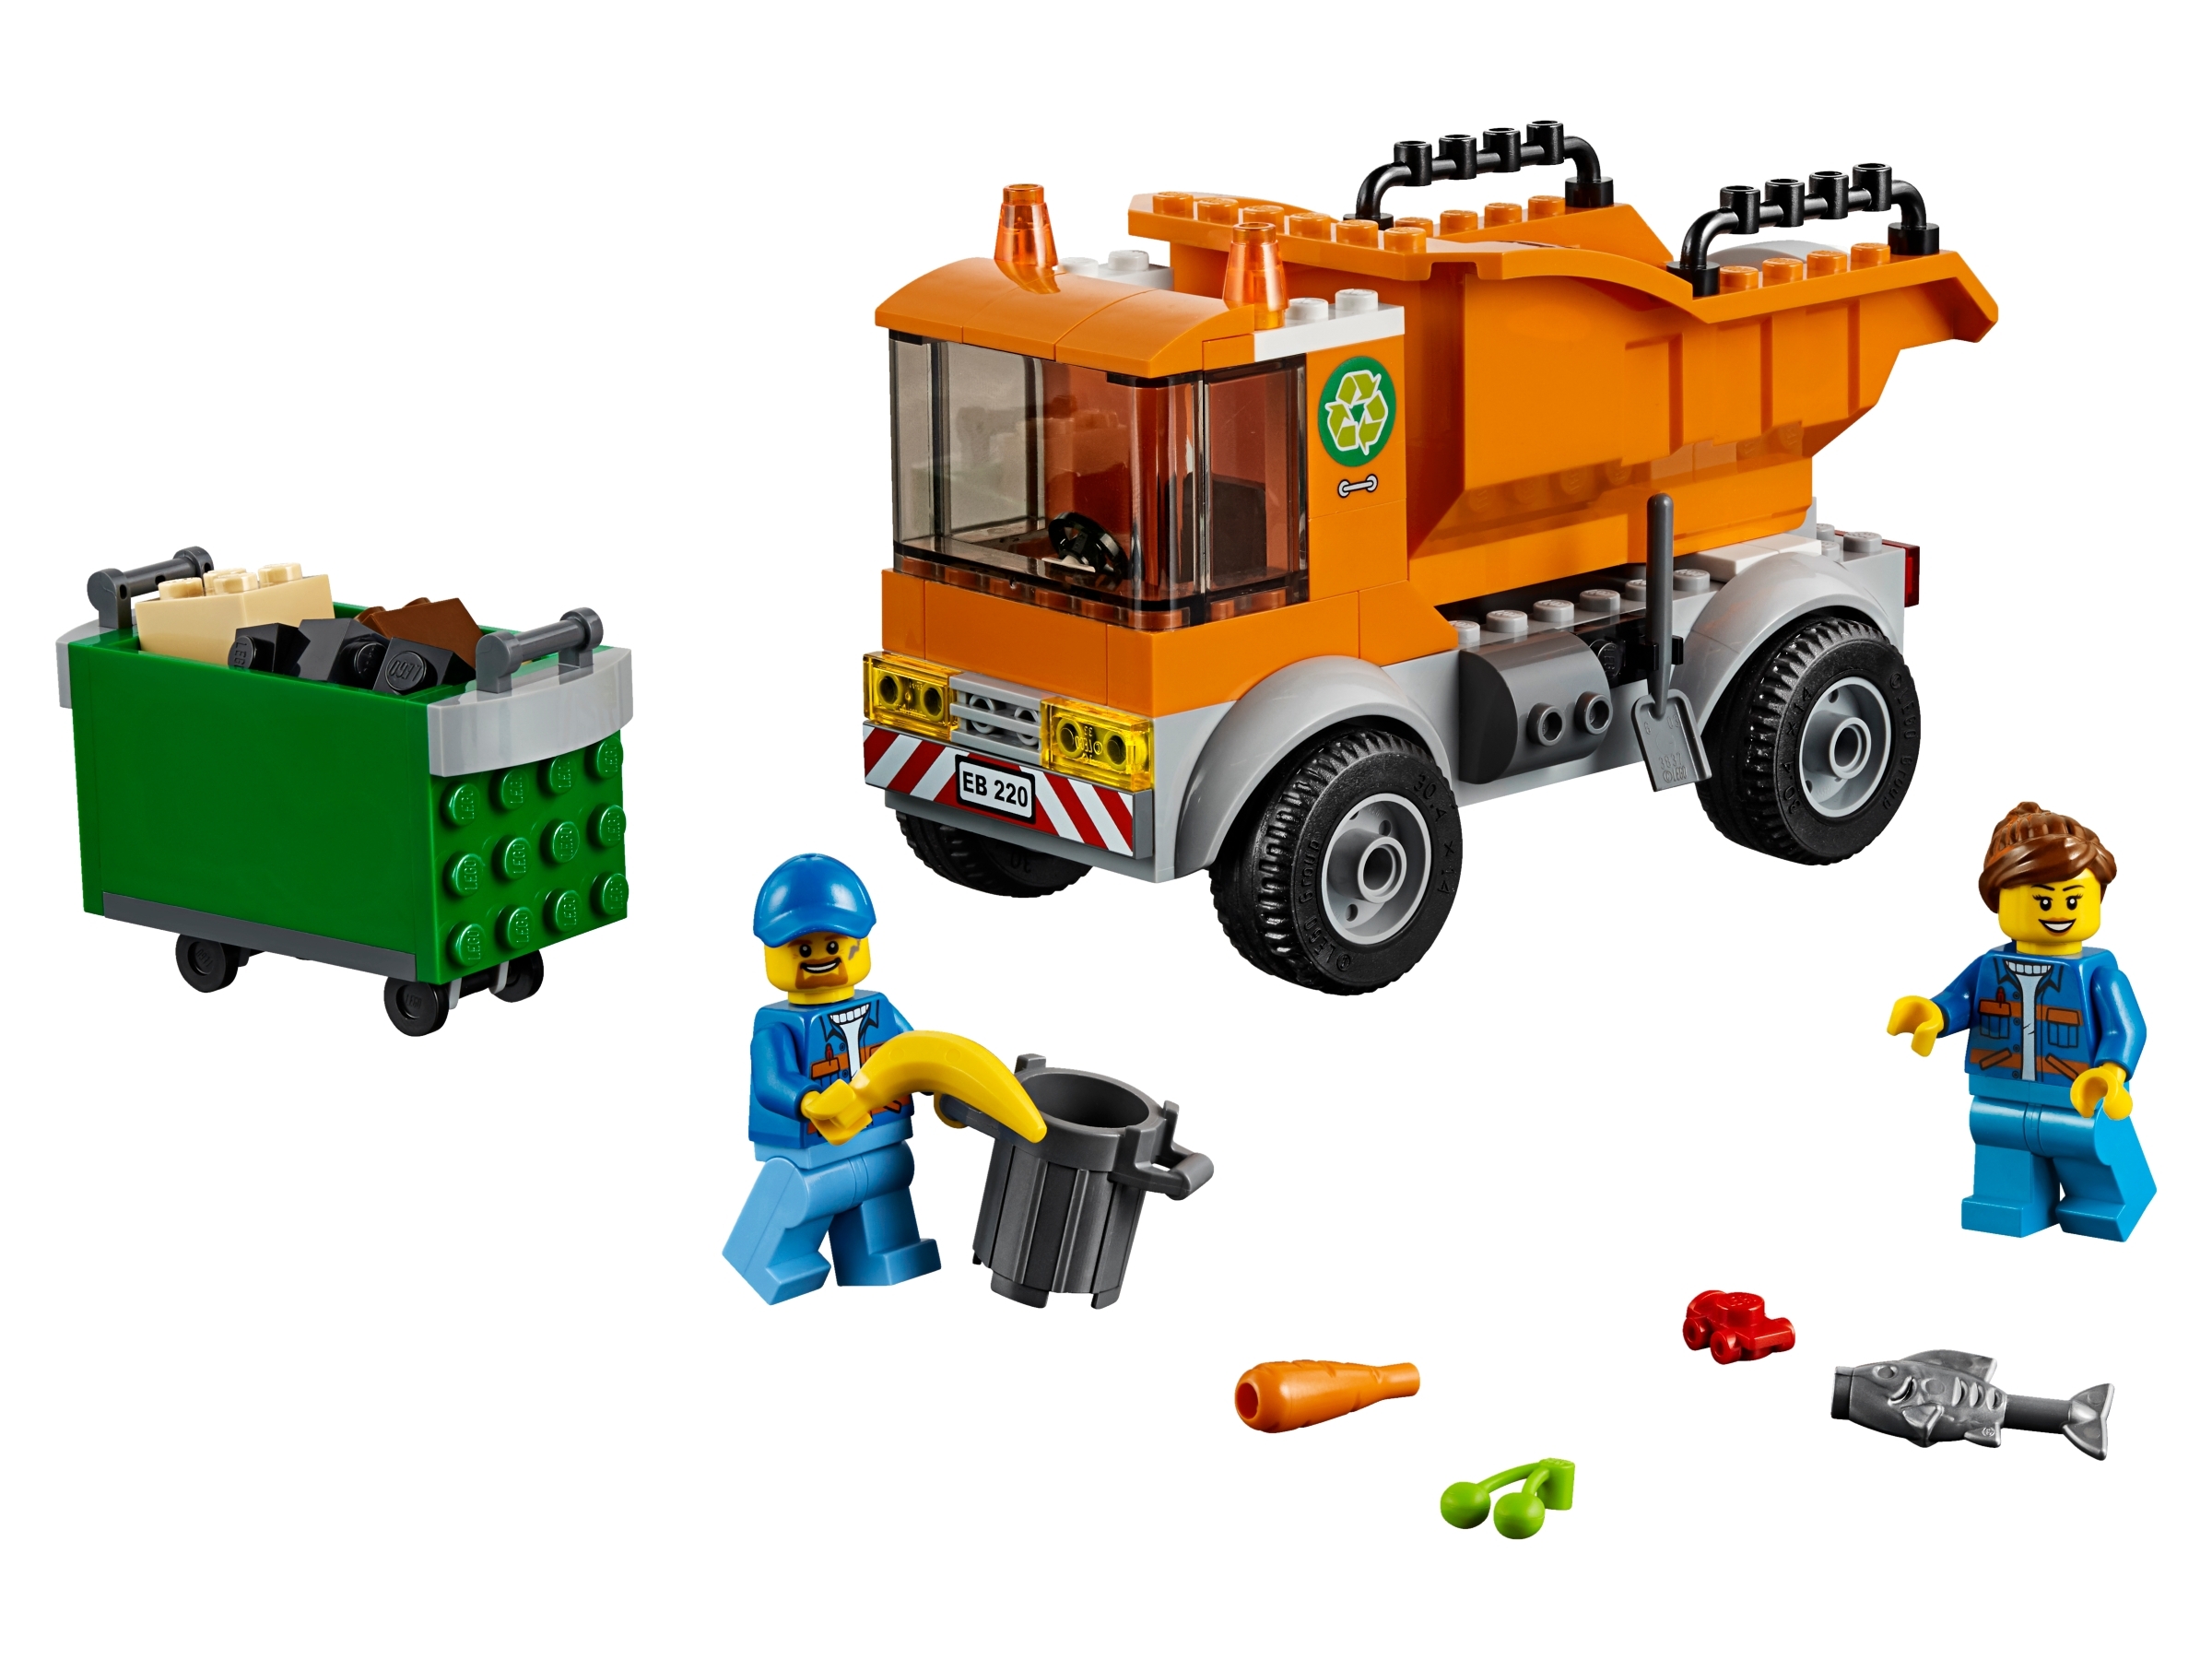 lego garbage truck instructions 60220